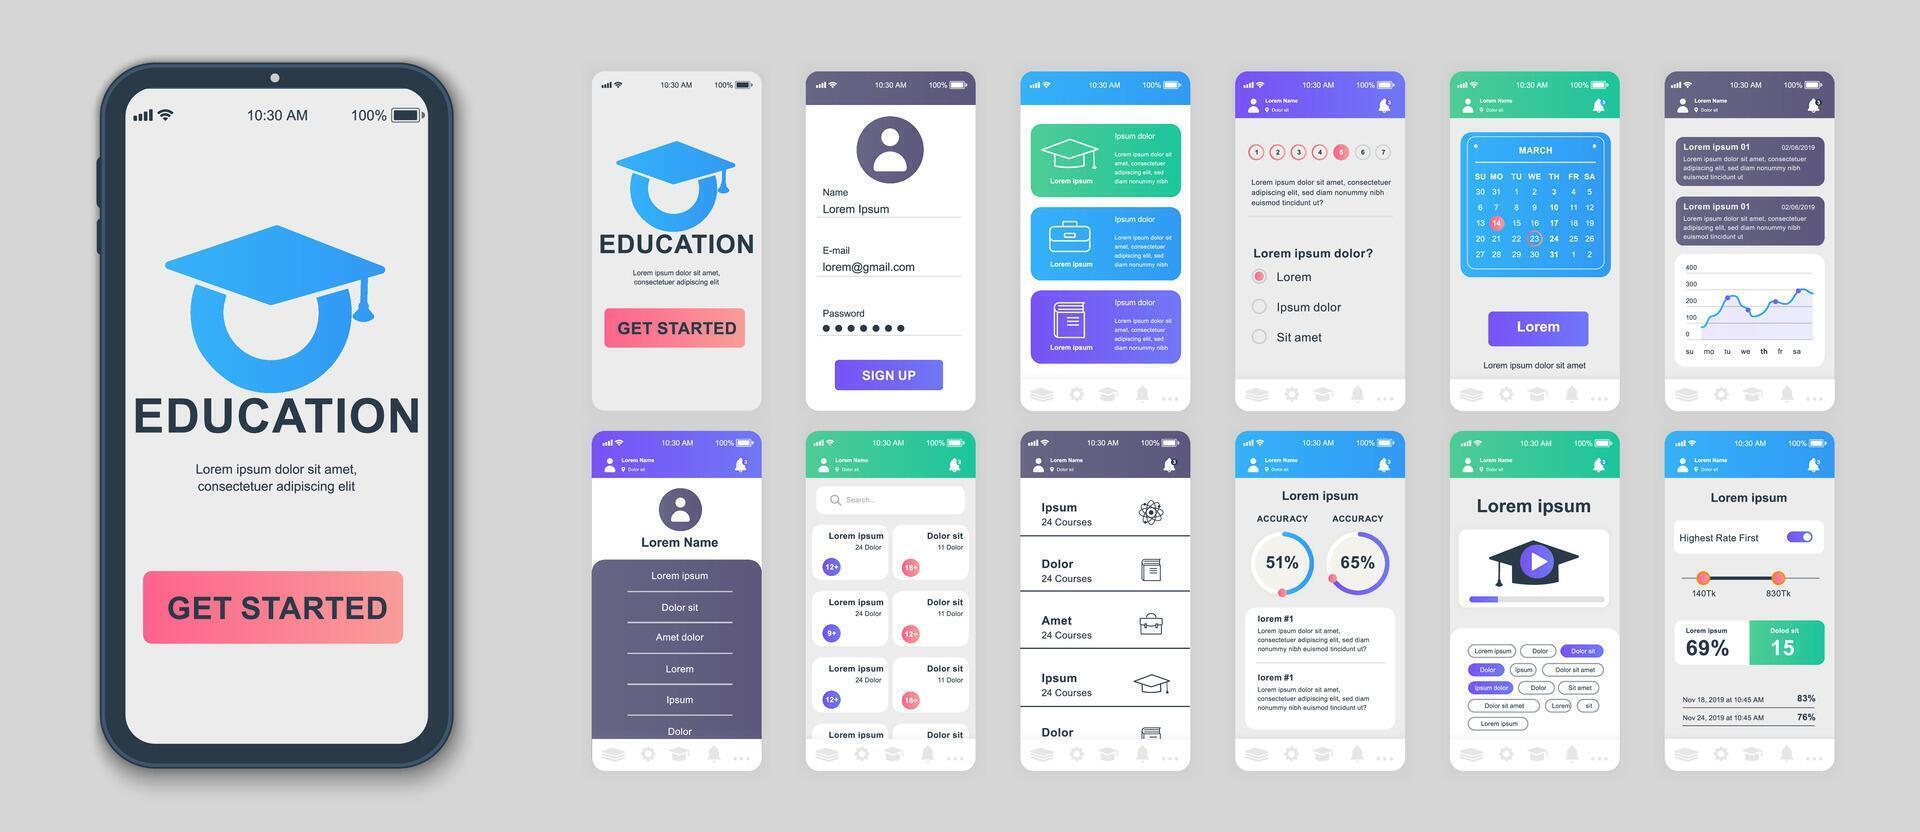 Education mobile app screens set for web templates. Pack of student profile, learning courses, calendar, online lessons, progress. UI, UX, GUI user interface kit for cellphone layouts. Vector design